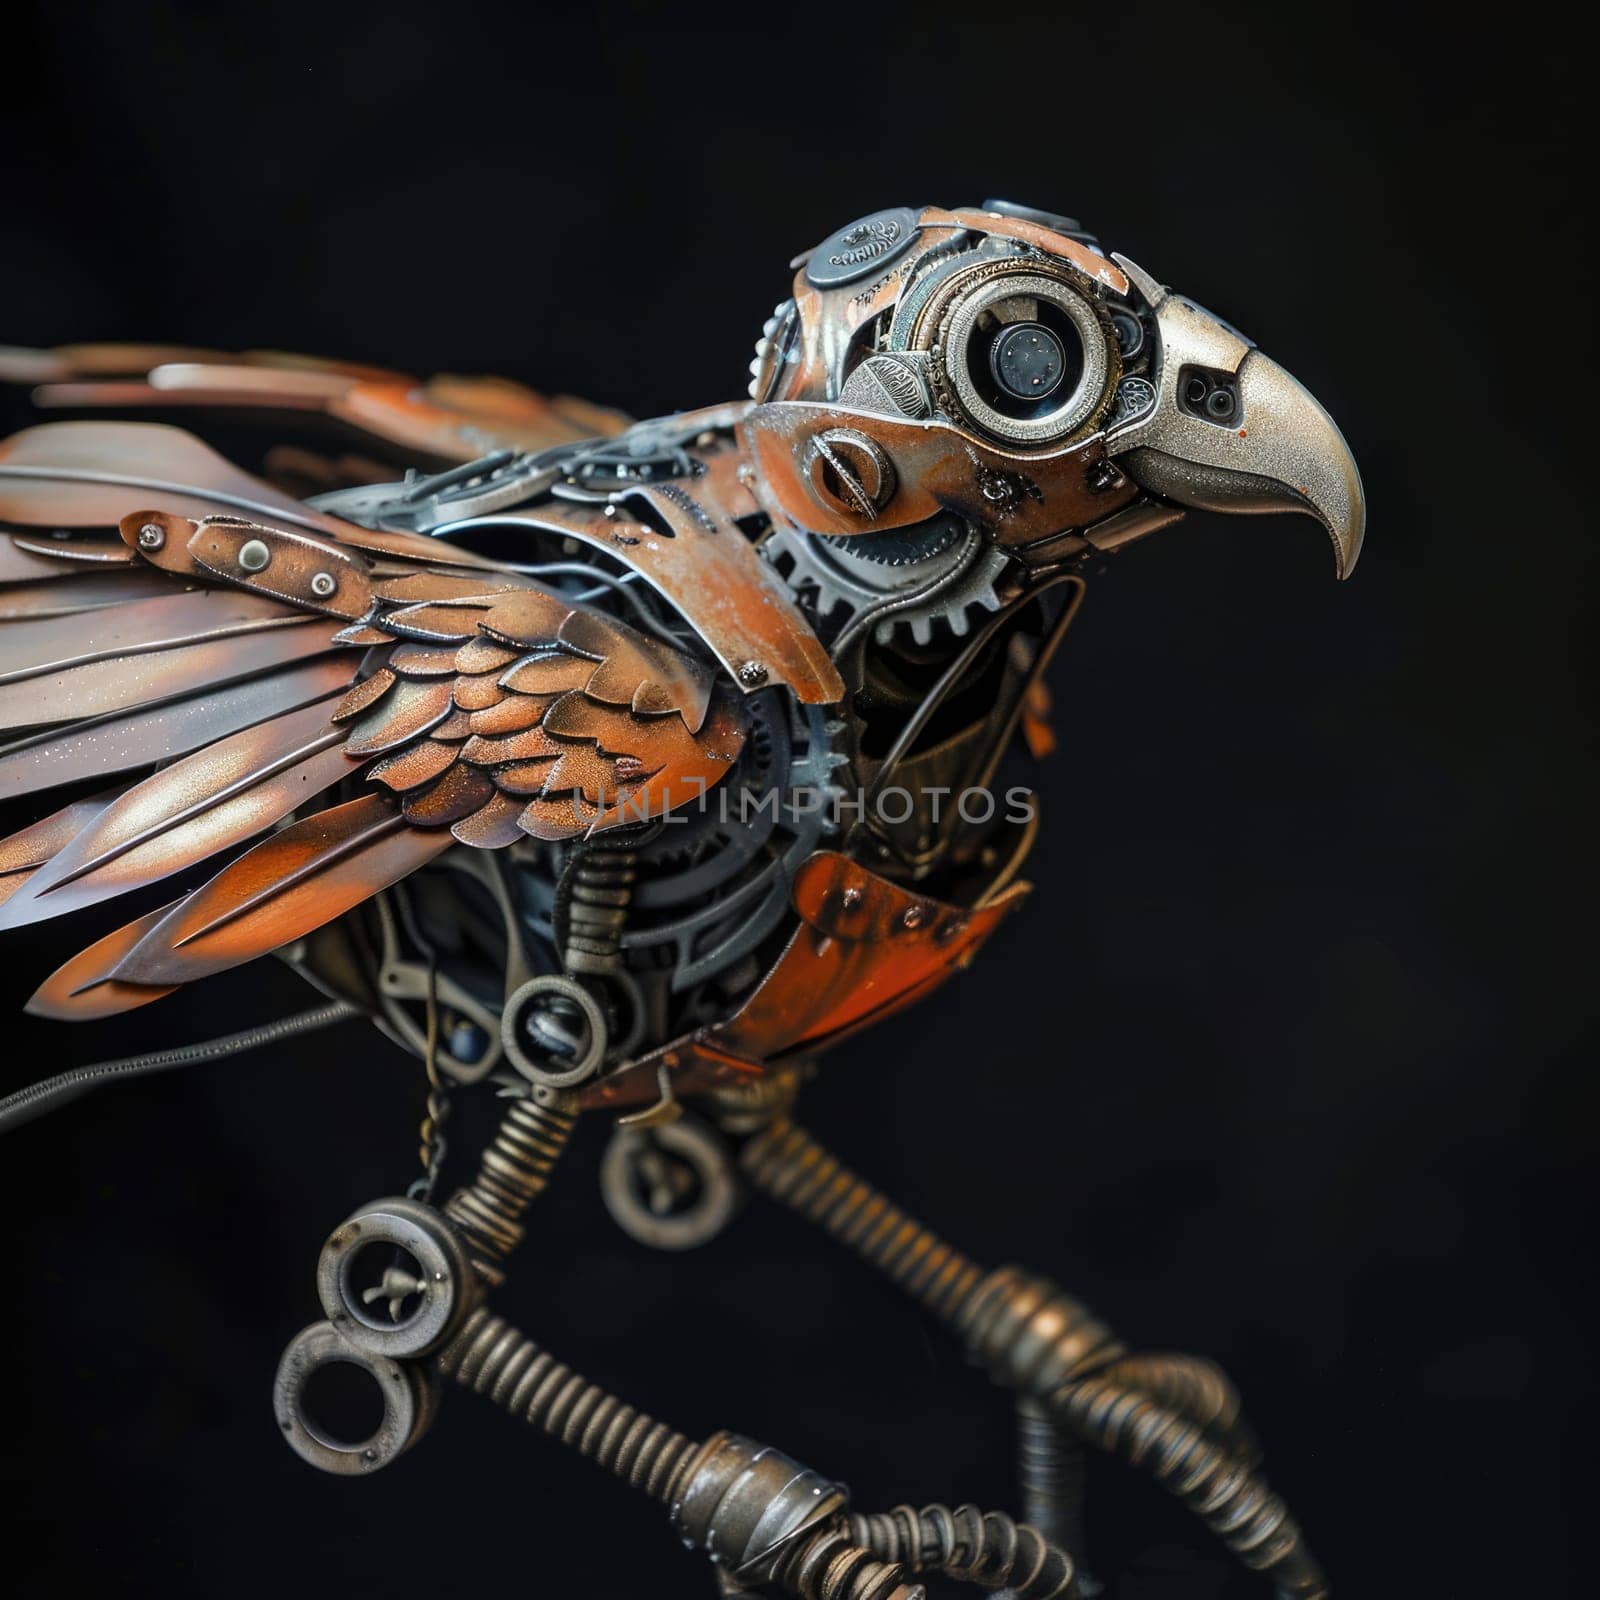 Sculpture of a eagle bird made out of metal pieces by natali_brill